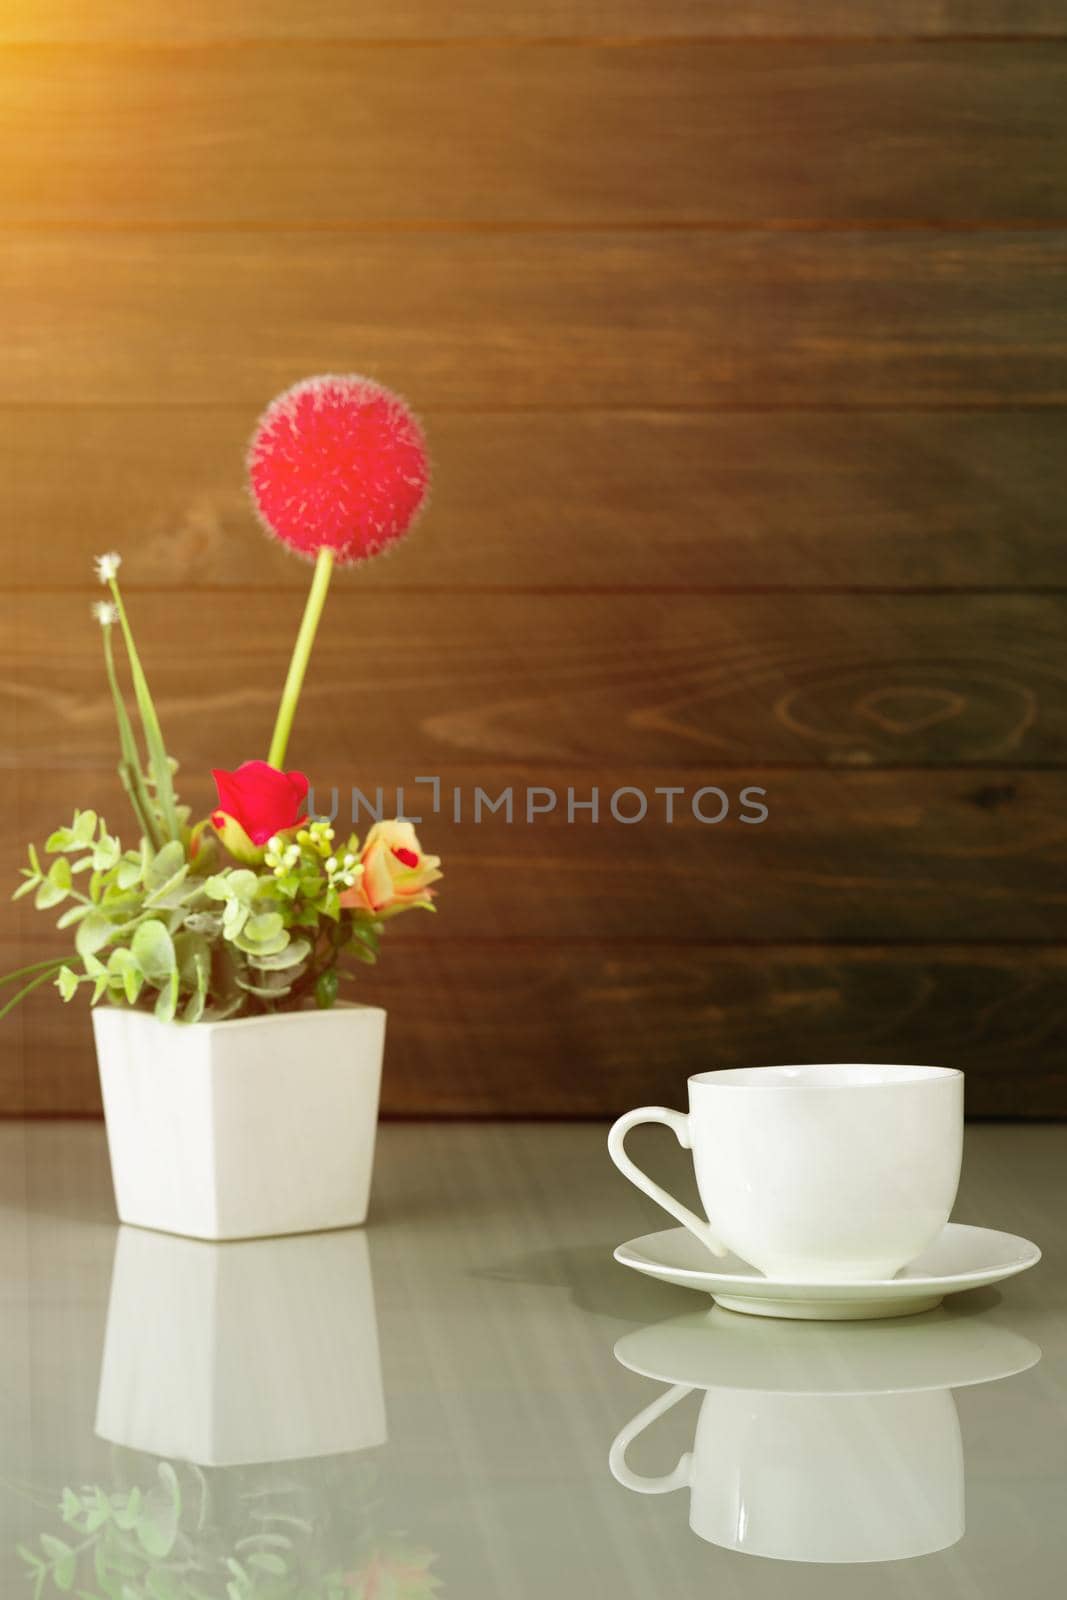 White coffee cup and Artificial flower vase bouquet over table with wood wall background